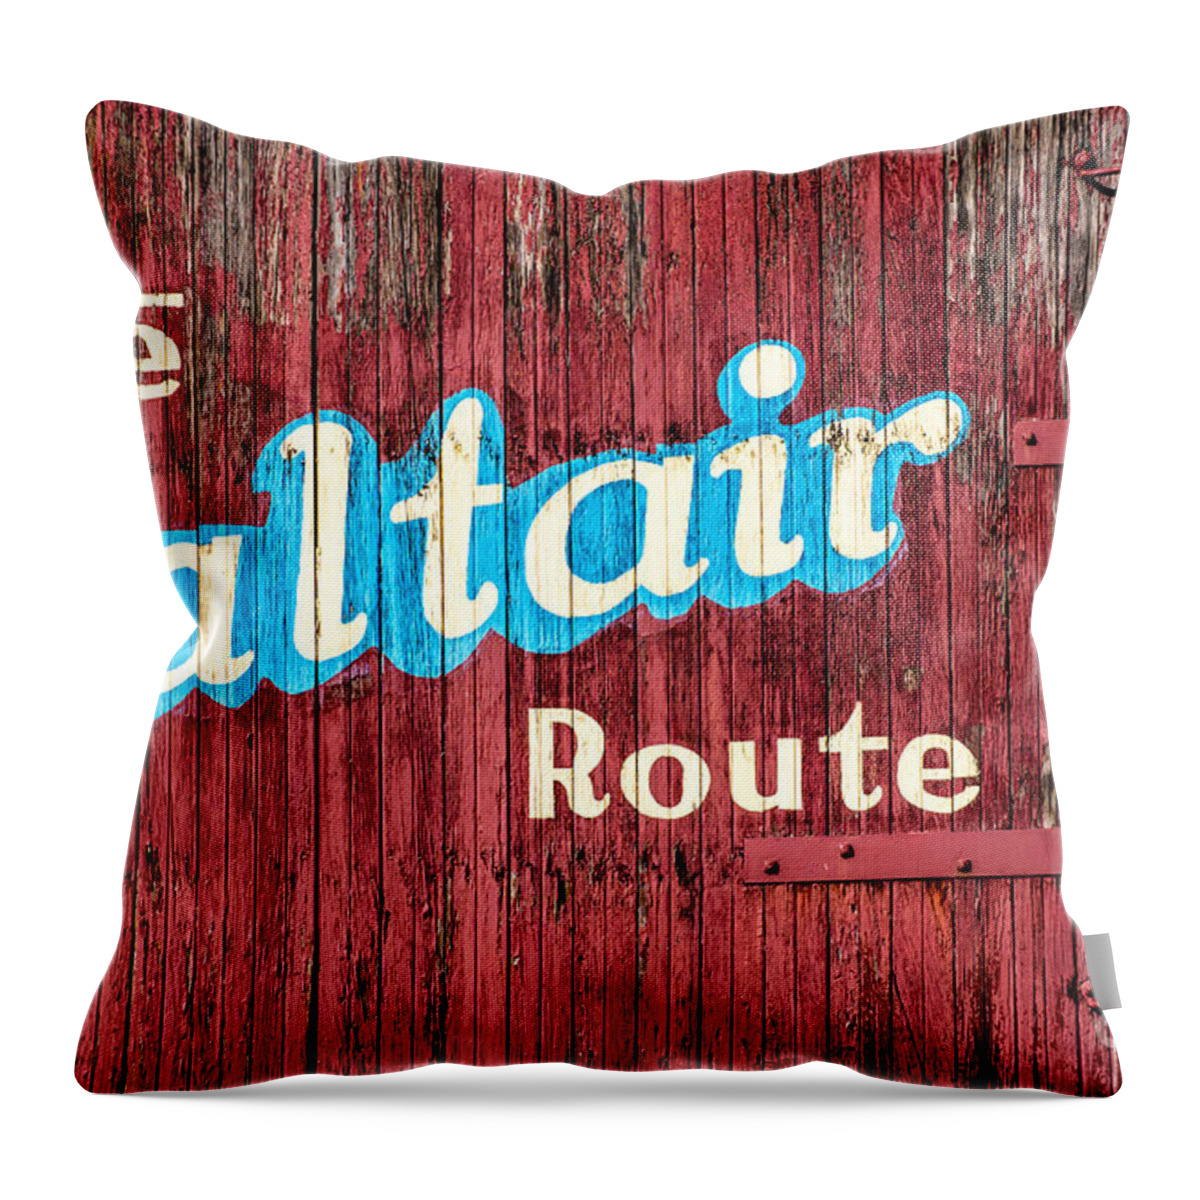 Saltair Route Throw Pillow featuring the photograph Saltair Route - Historic Salt Lake City Railroad by Gary Whitton